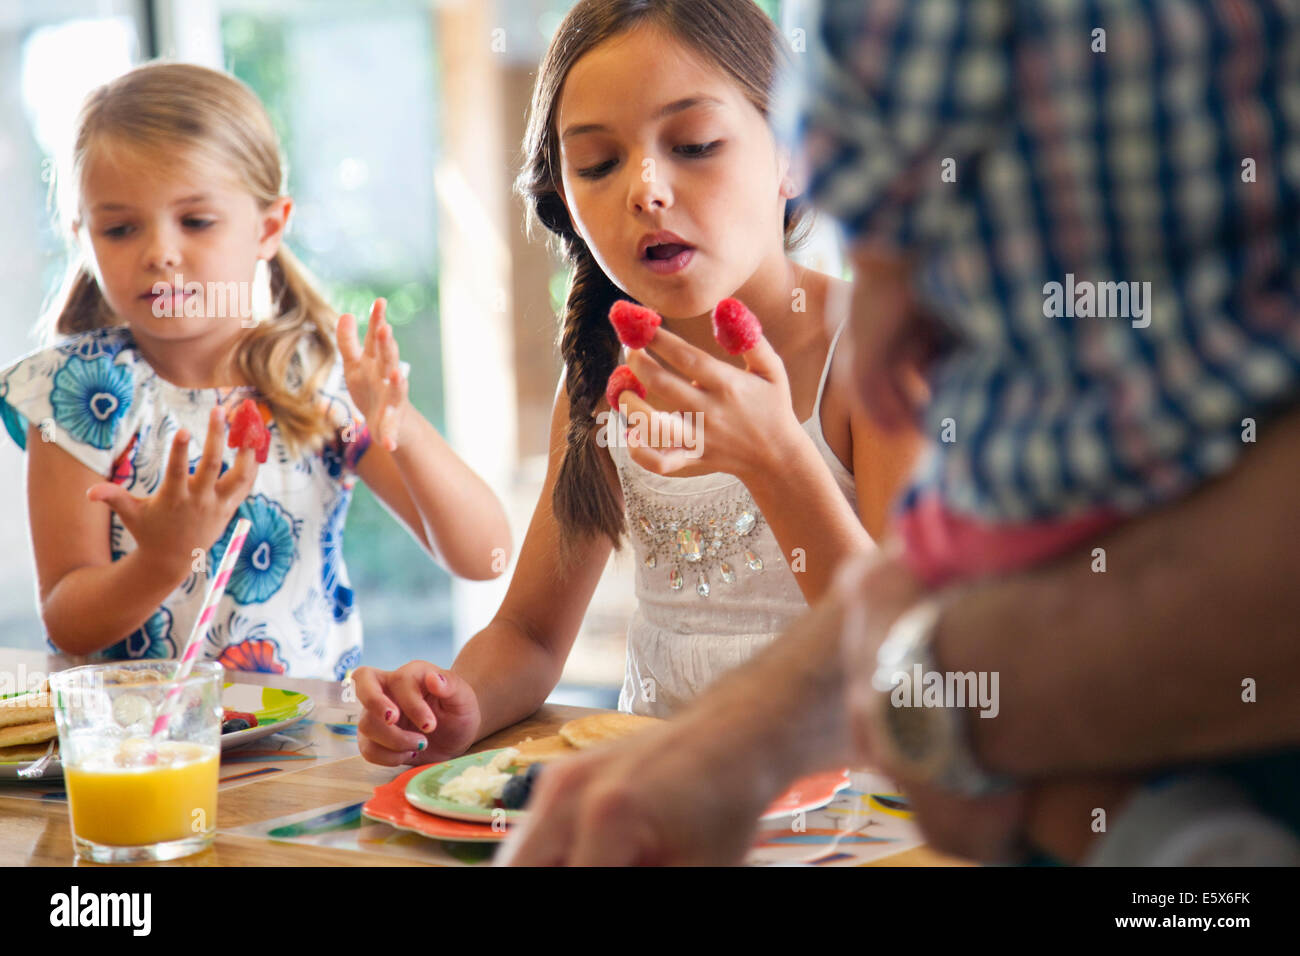 Two sisters with raspberries on their fingers at kitchen breakfast bar Stock Photo